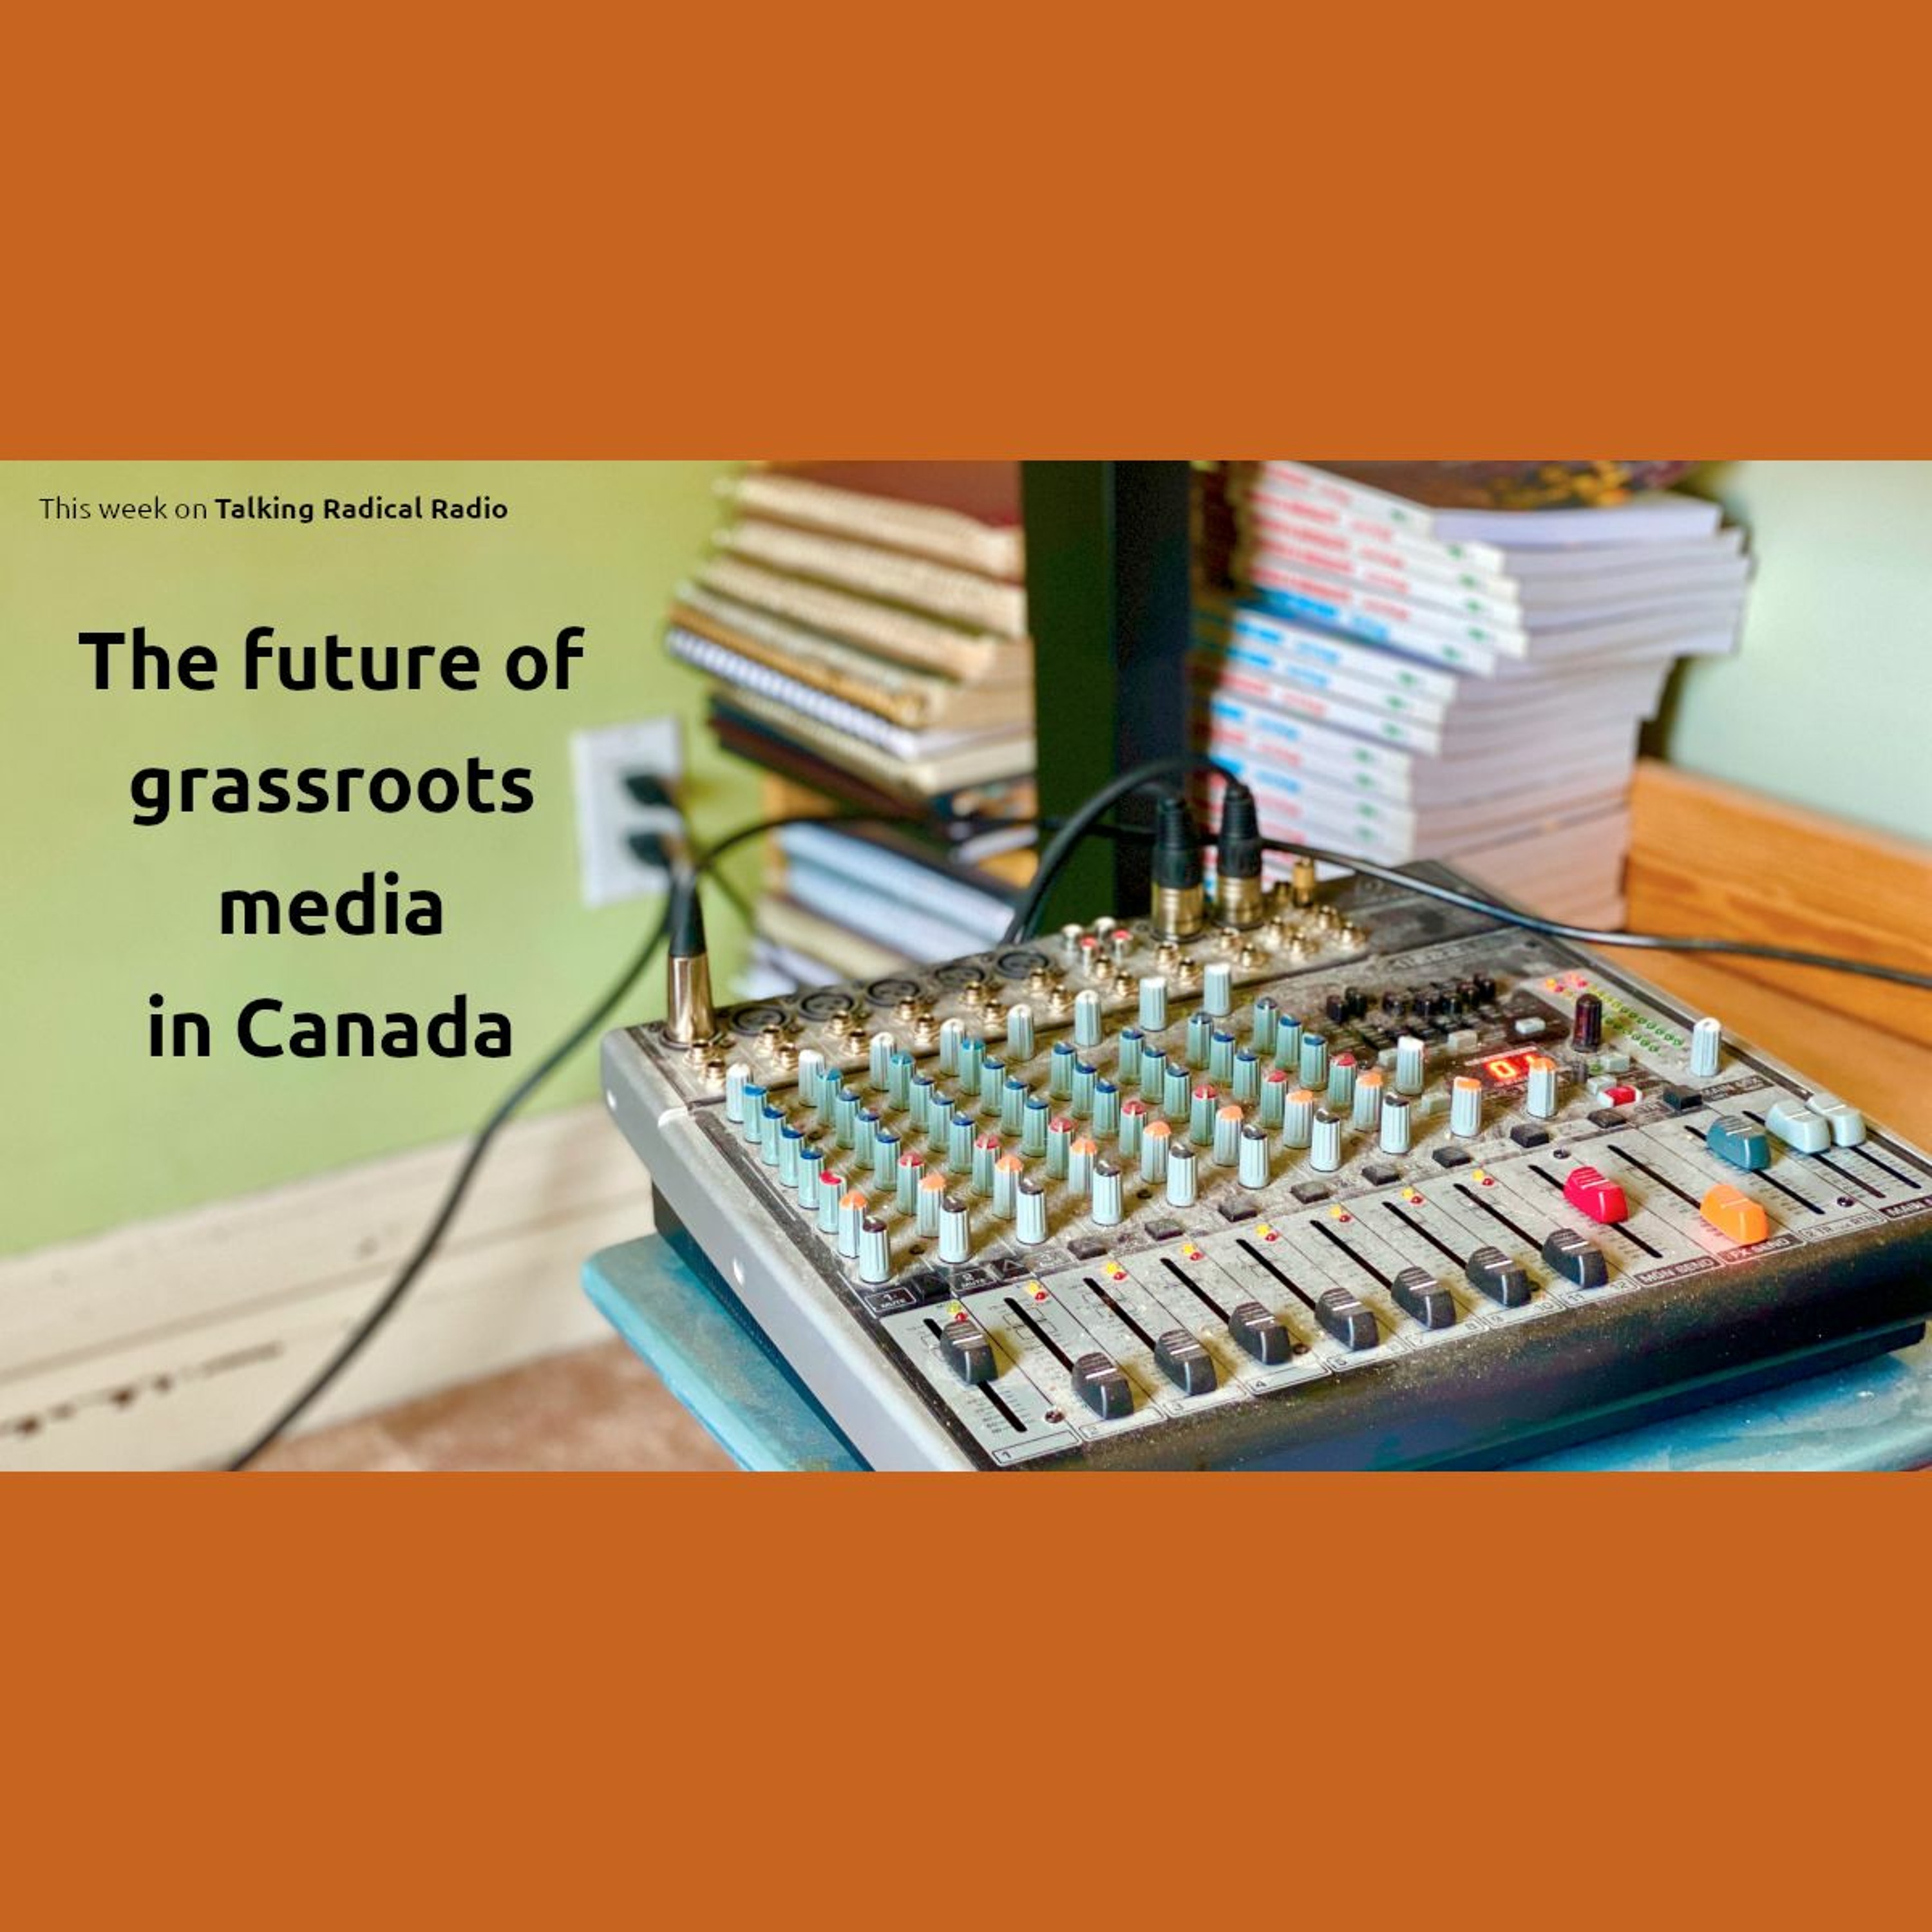 The future of grassroots media in Canada